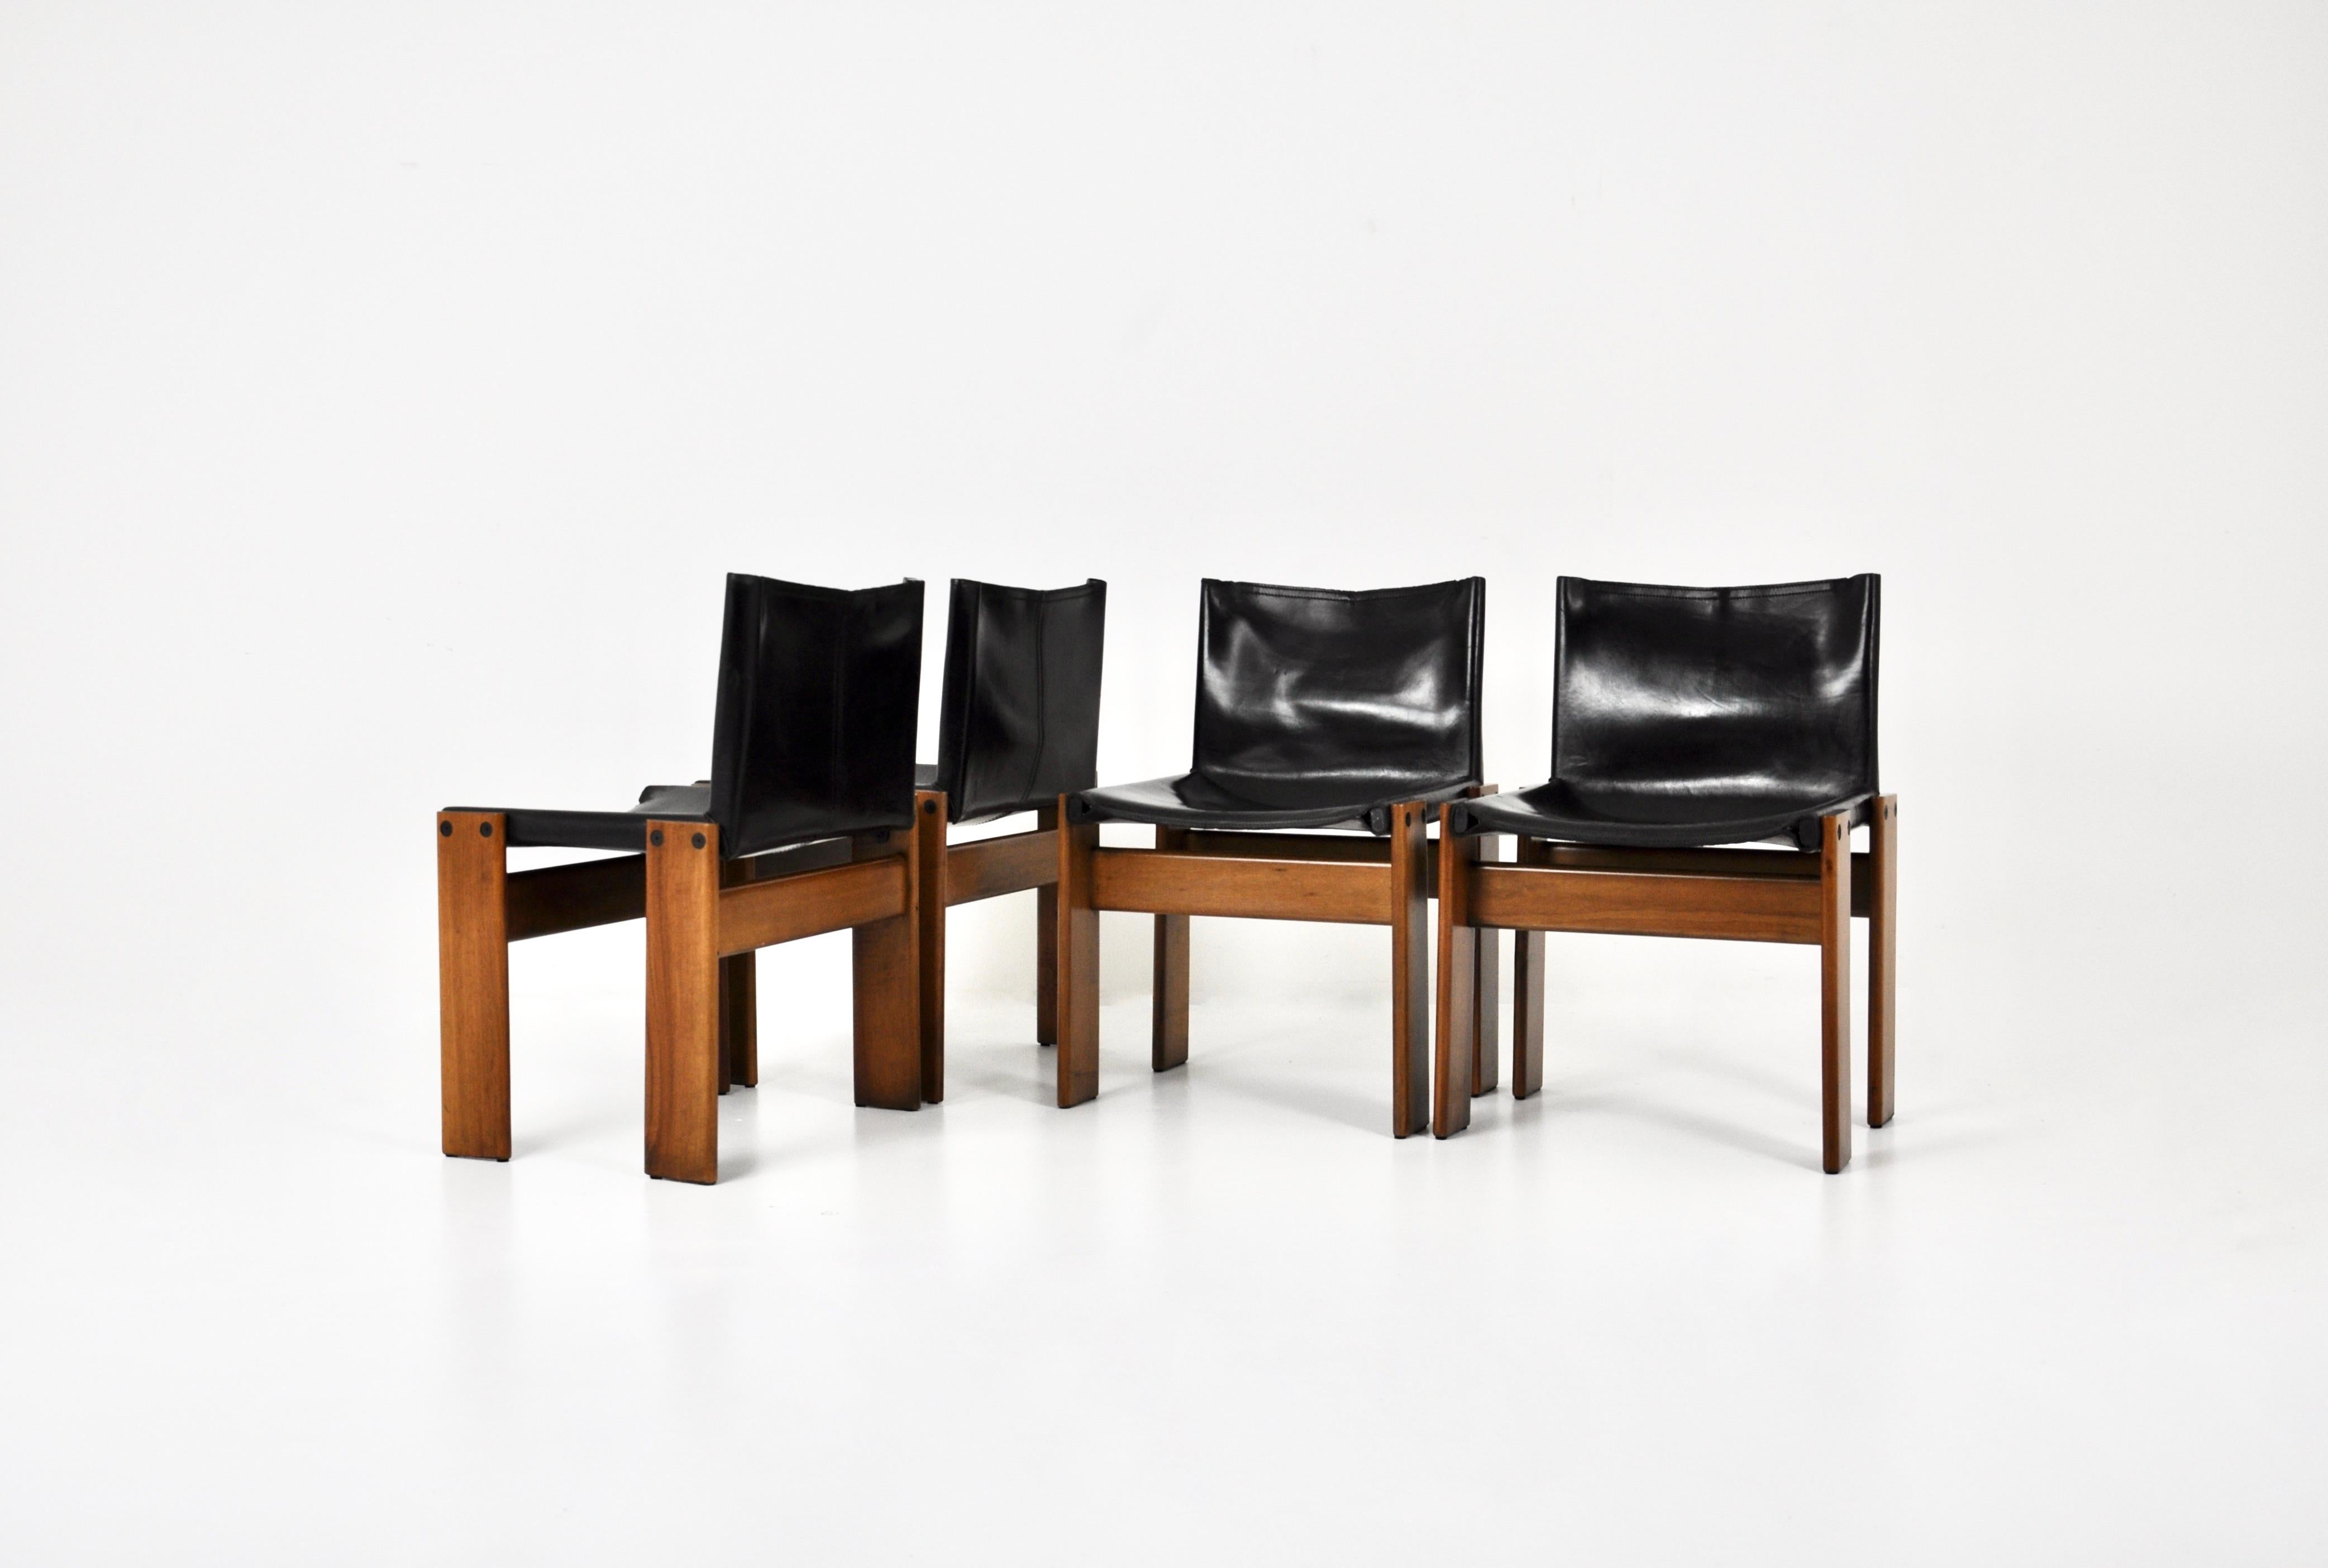 Set of 4 chairs in black leather and wood designed by Afra & Tobia Scarpa. Model: Monk. Seat height: 43cm Wear due to time and age of the chairs.
 